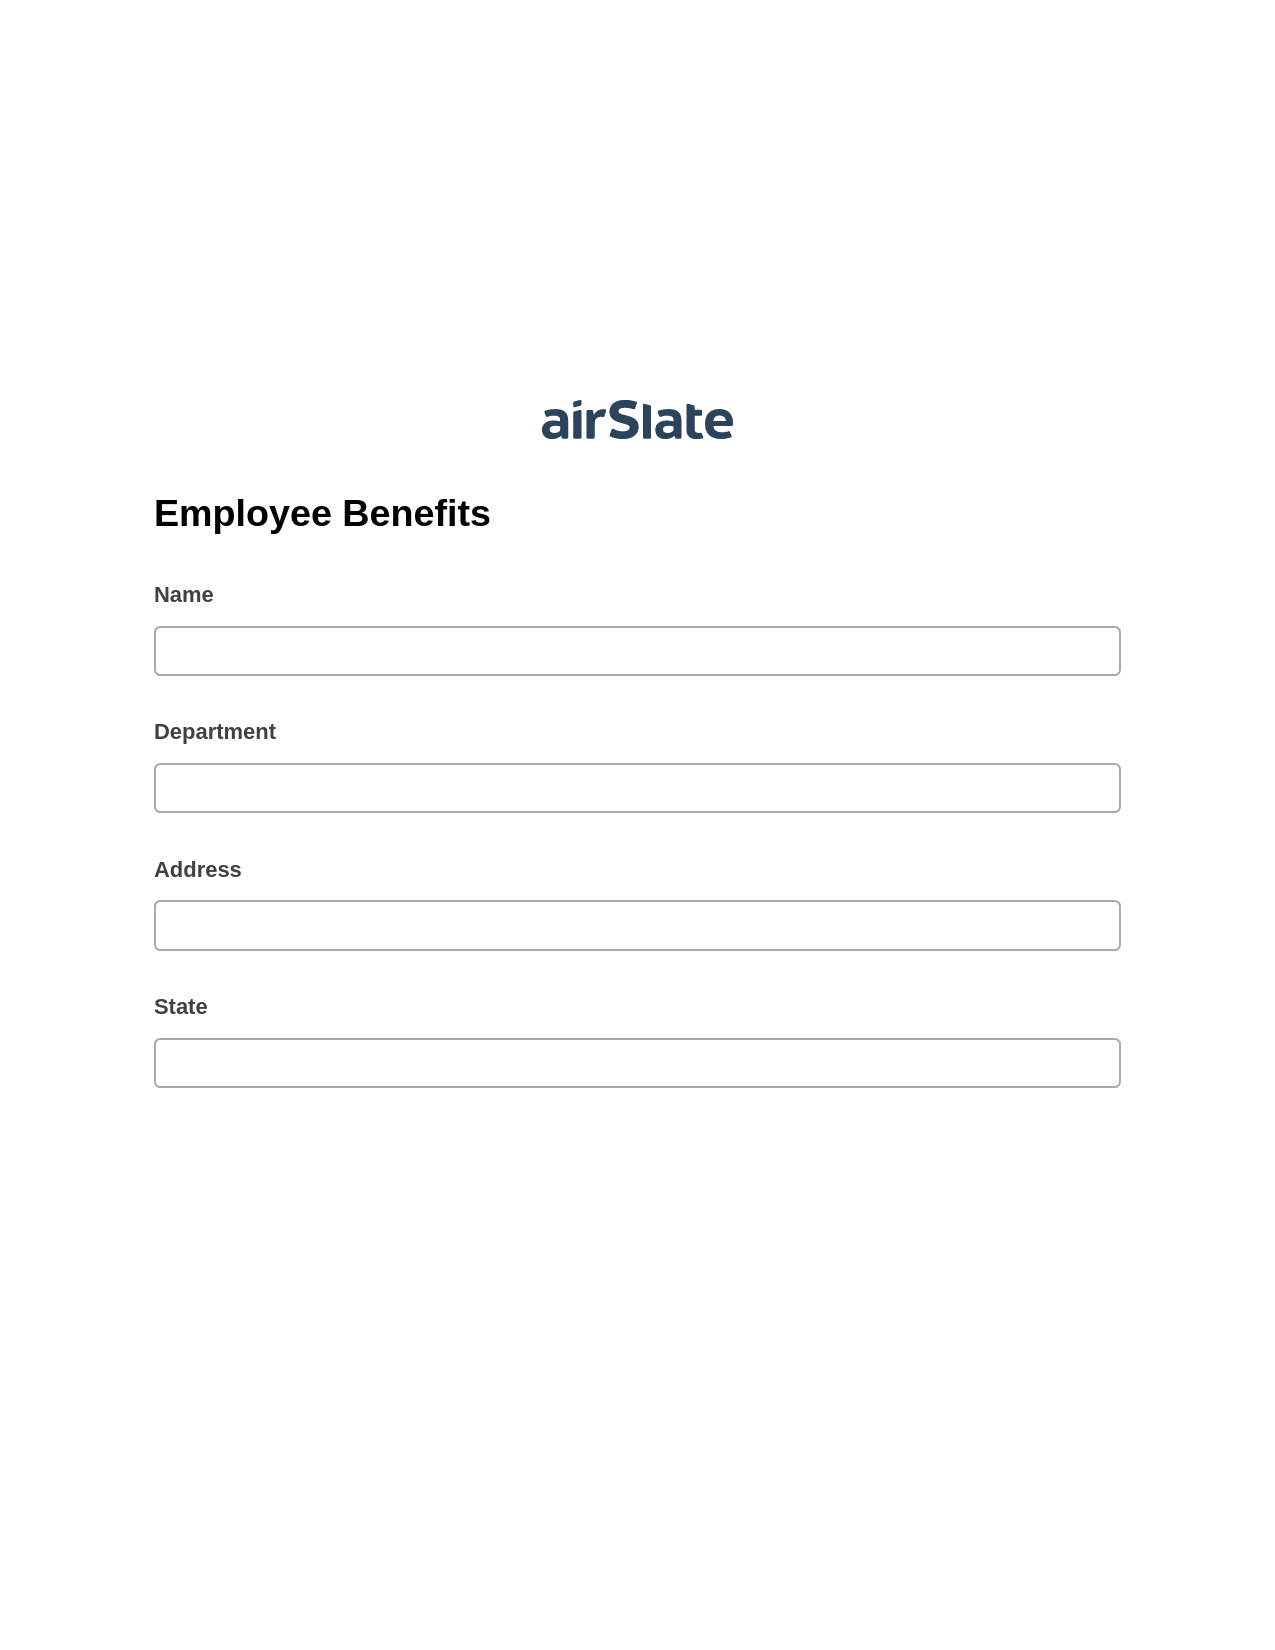 Employee Benefits Pre-fill from CSV File Bot, Lock the slate bot, Post-finish Document Bot